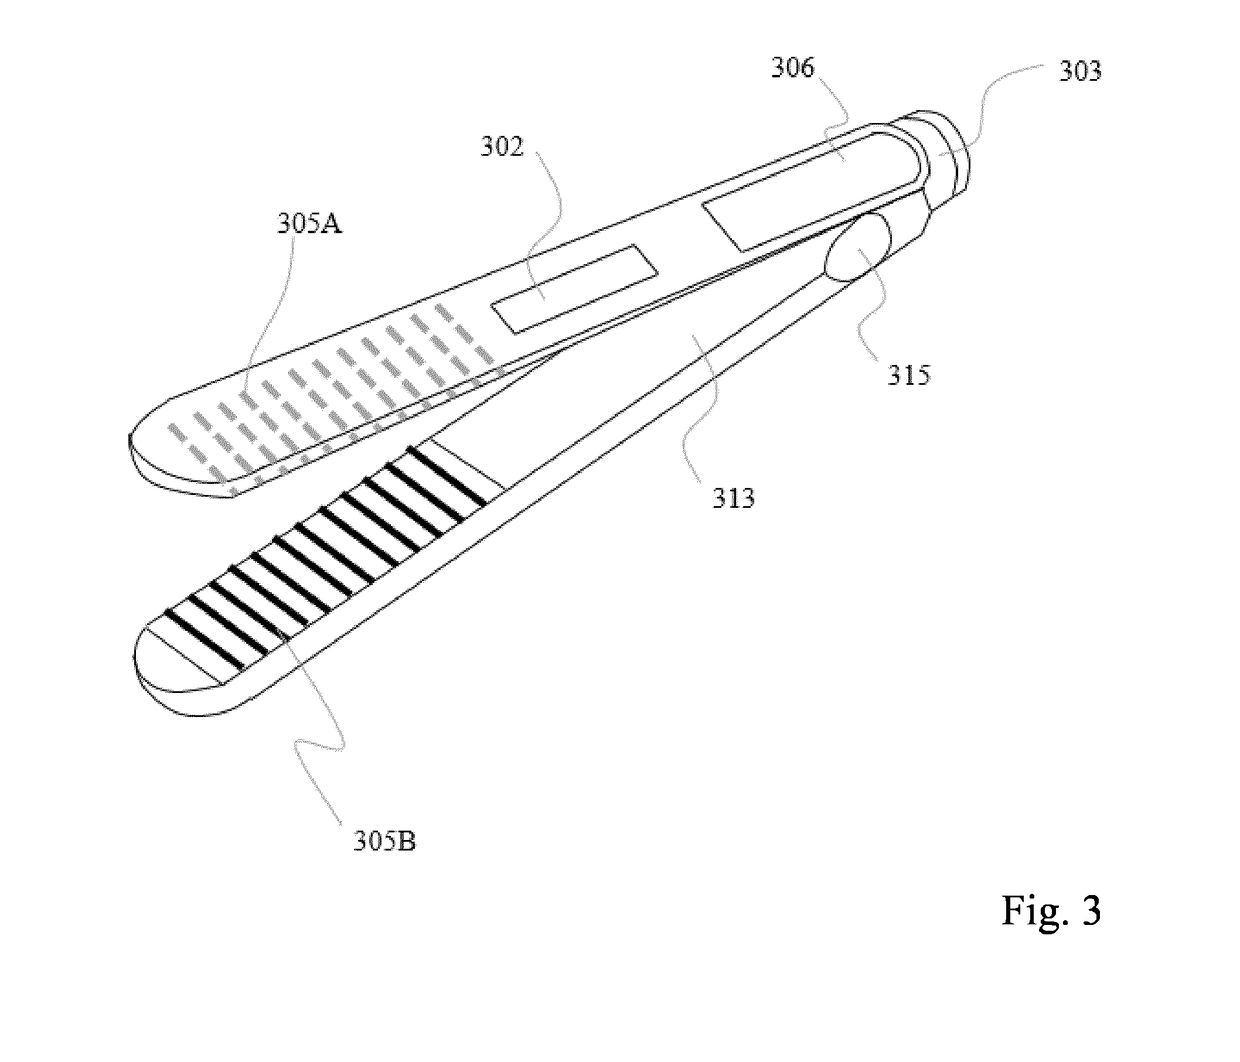 Hair care device and method for enhancing uptake of a topical in hair